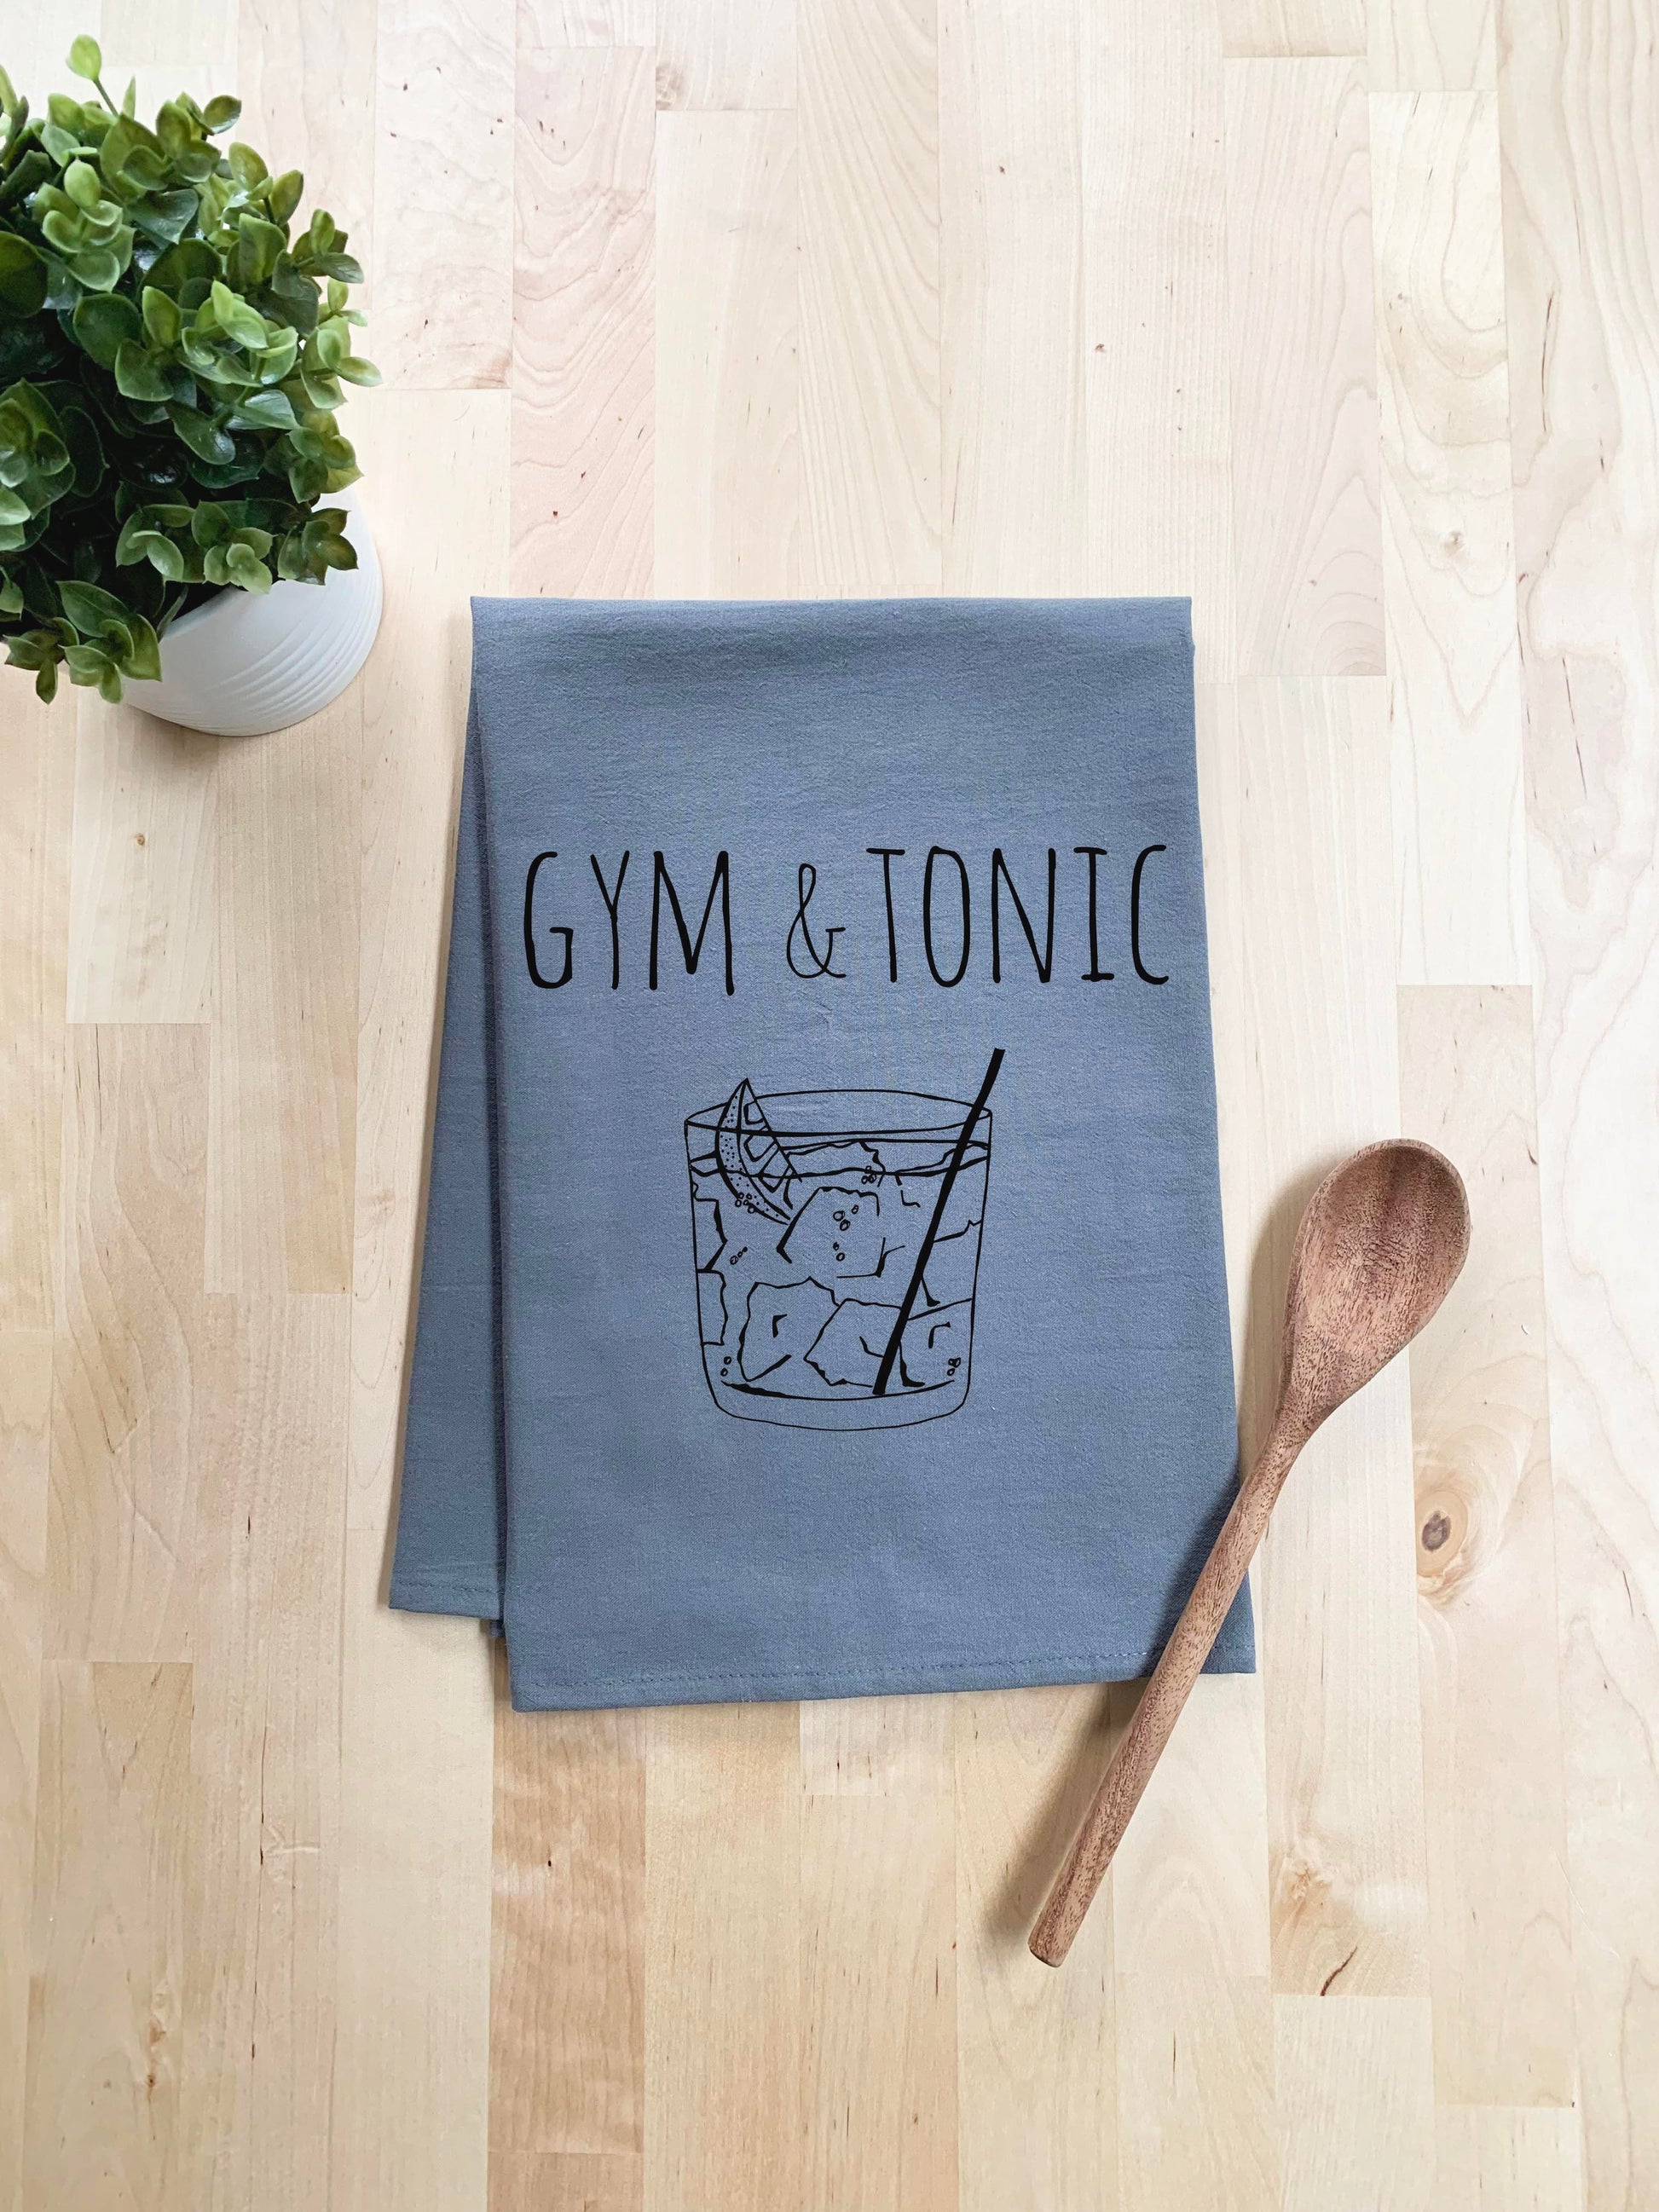 Gym & Tonic Dish Towel - White Or Gray - MoonlightMakers